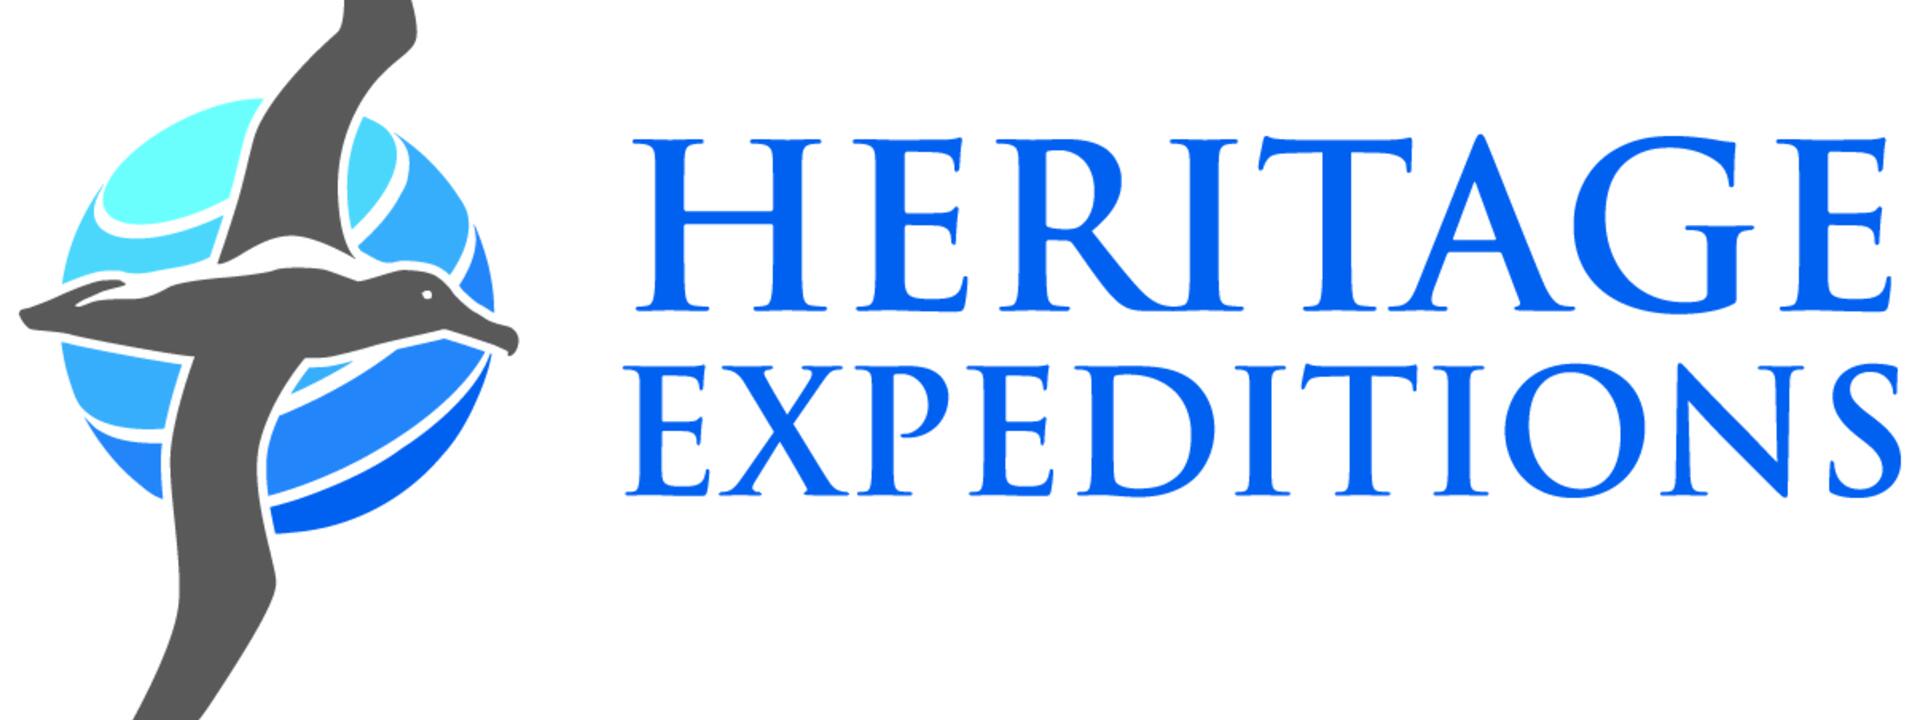 heritage-expeditions-logo_primary.jpg